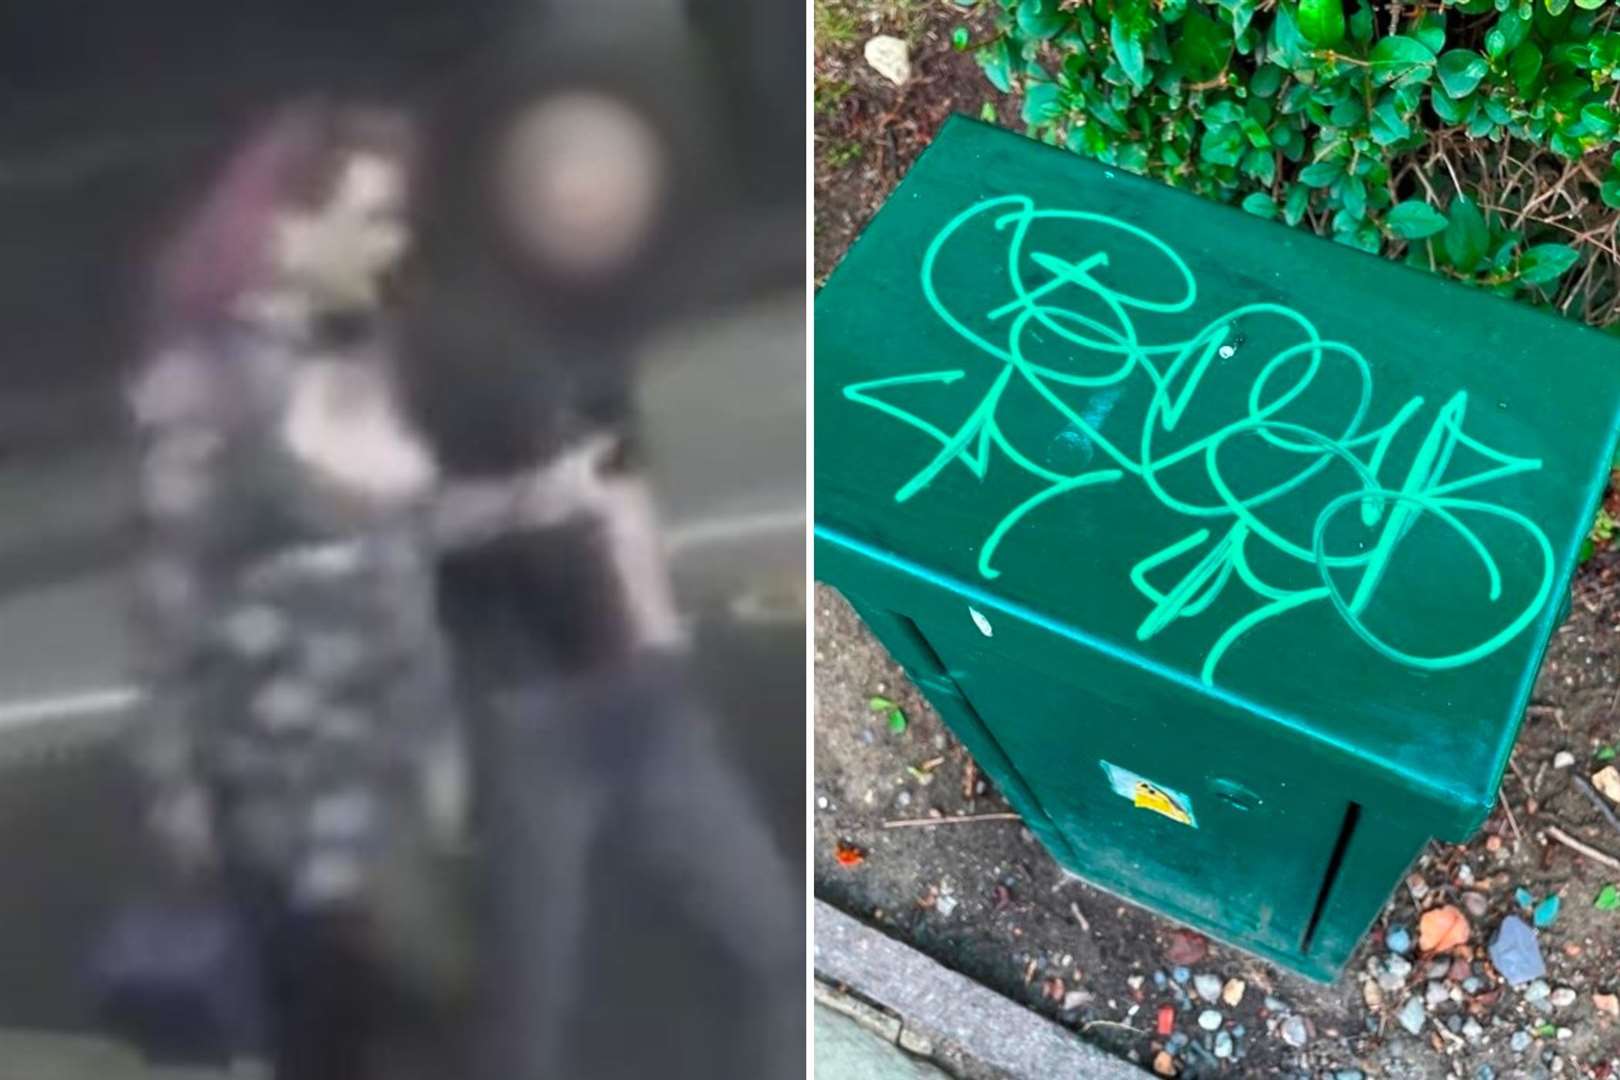 The city council has issued an appeal to find a prolific graffiti tagger